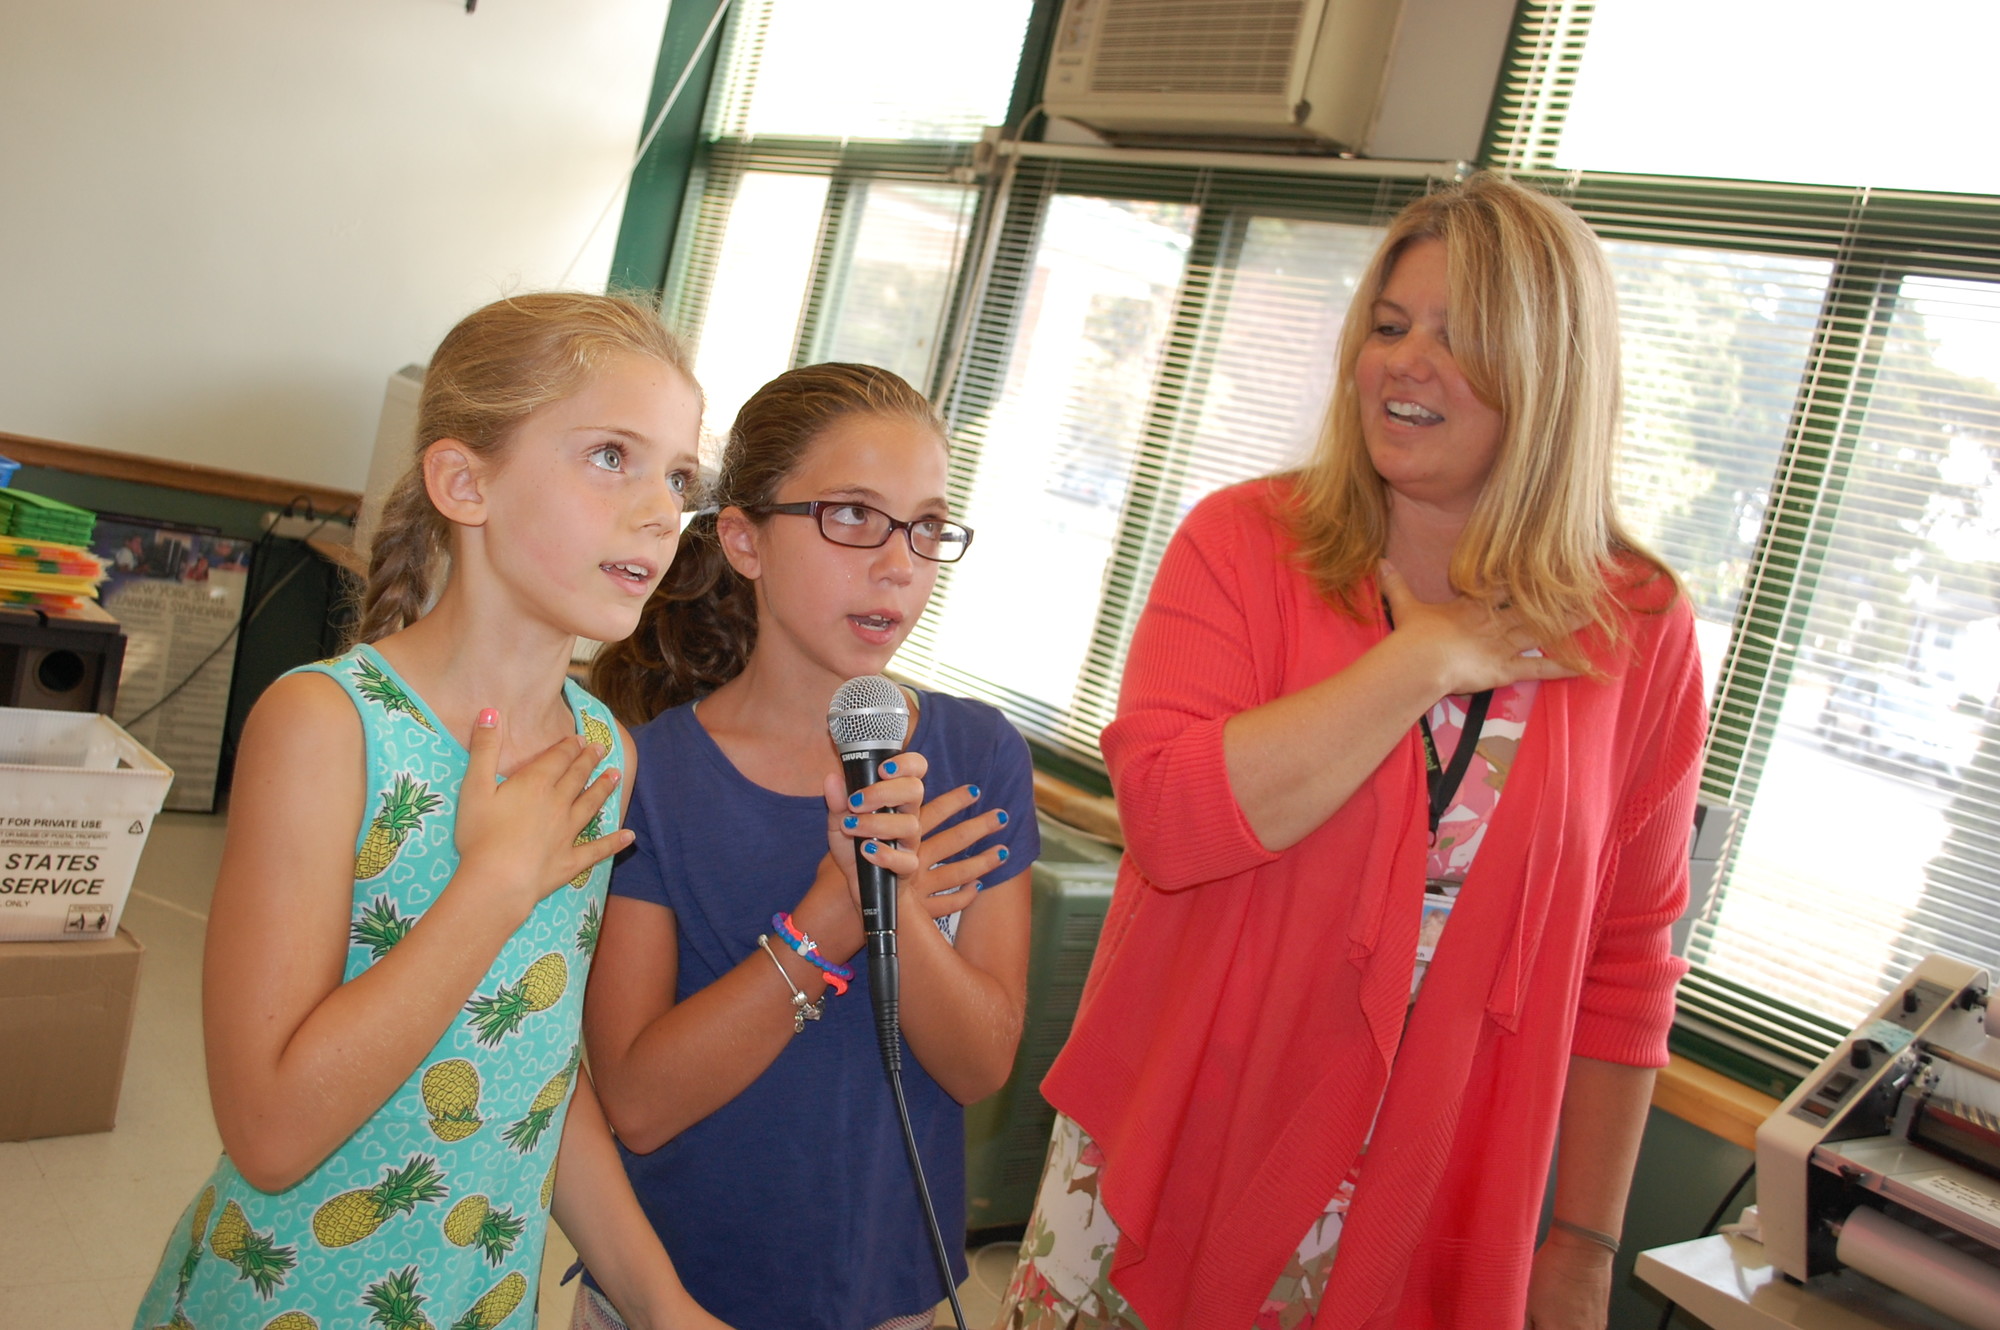 Fifth-graders Emily Bowles, left, and Abby Bussani, along with Principal Debra Emmerich, led the school in the first Pledge of Allegiance of the new year.